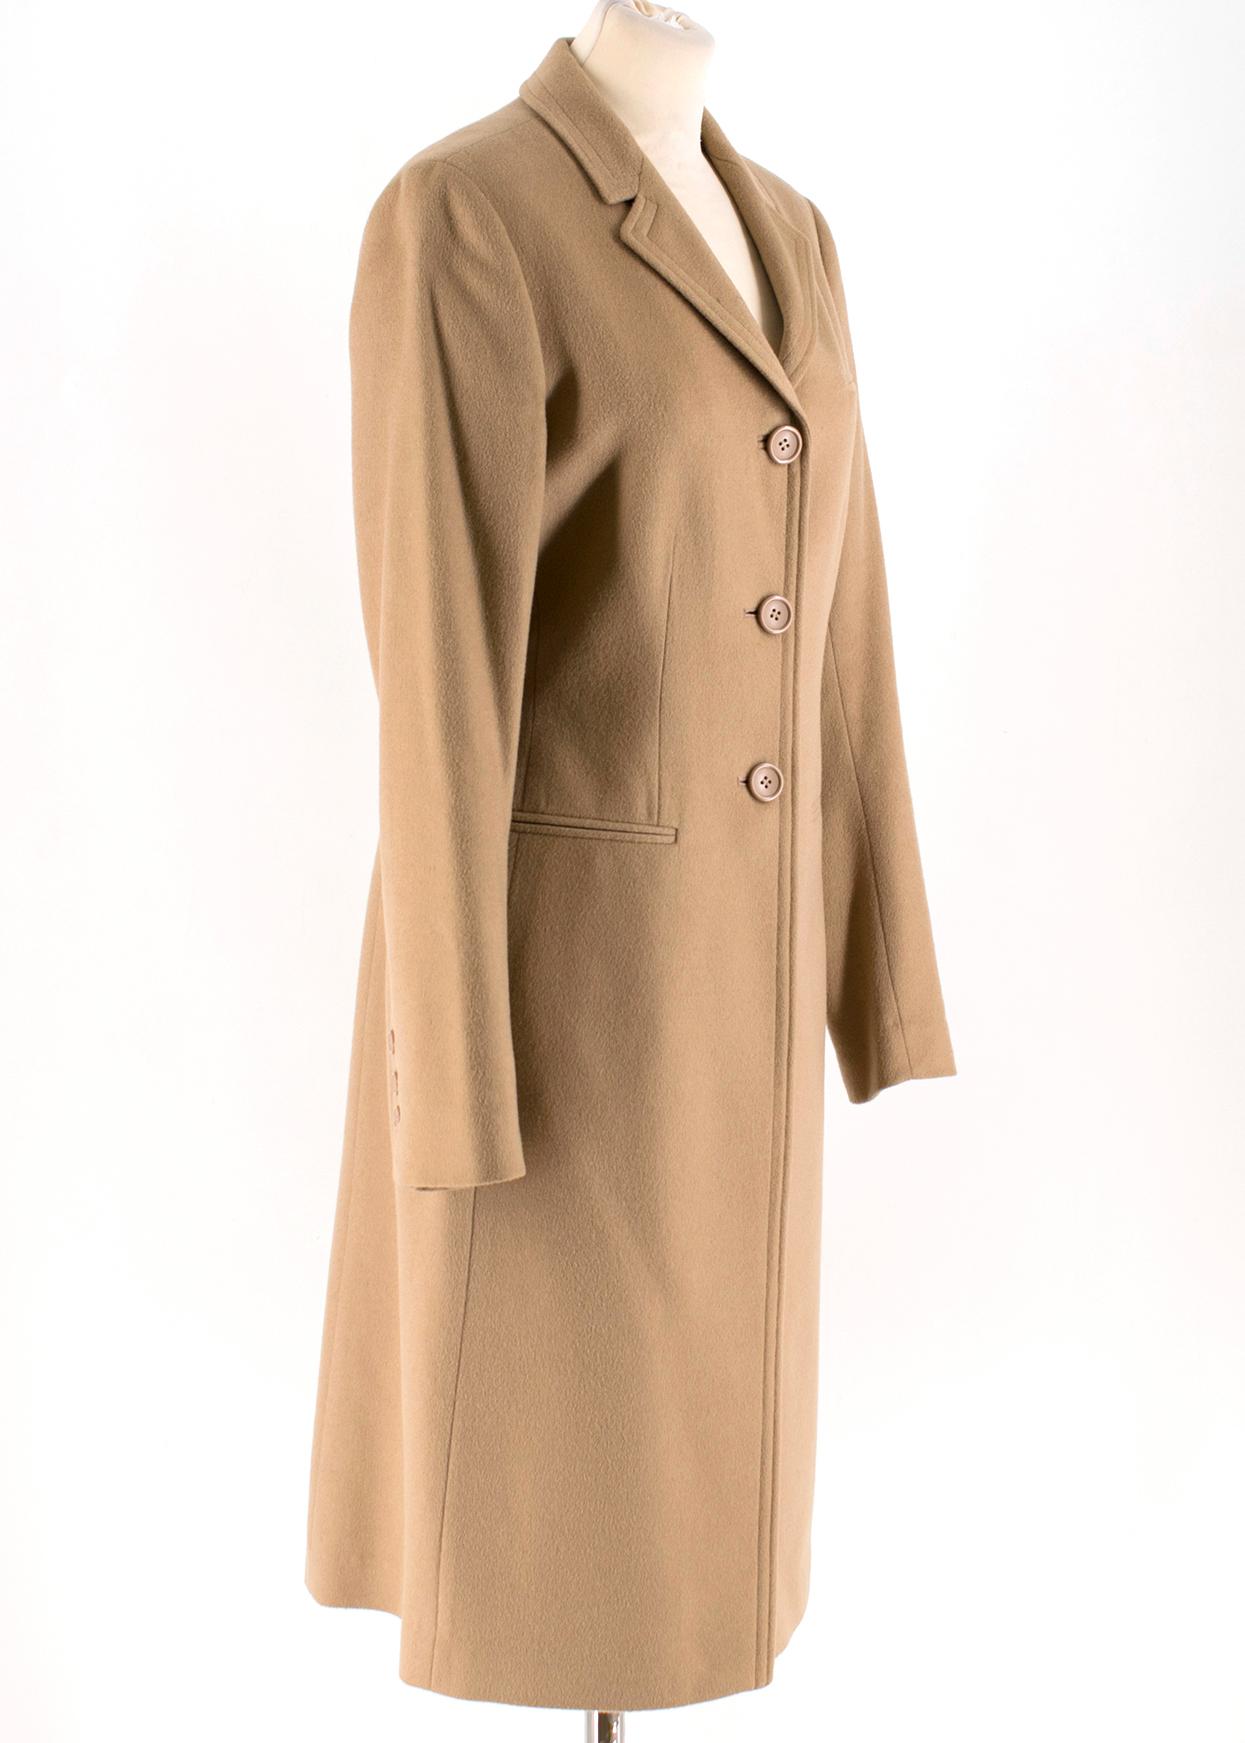 Calvin Klein Camel Wool & Cashmere-Blend Coat 

- Wool and cashmere-blend coat
- Long sleeves
- Standard notch collar
- Front centre snap button closure
- Mid-weight
- Non-functional pockets

Measurements are taken with the item lying flat, seam to